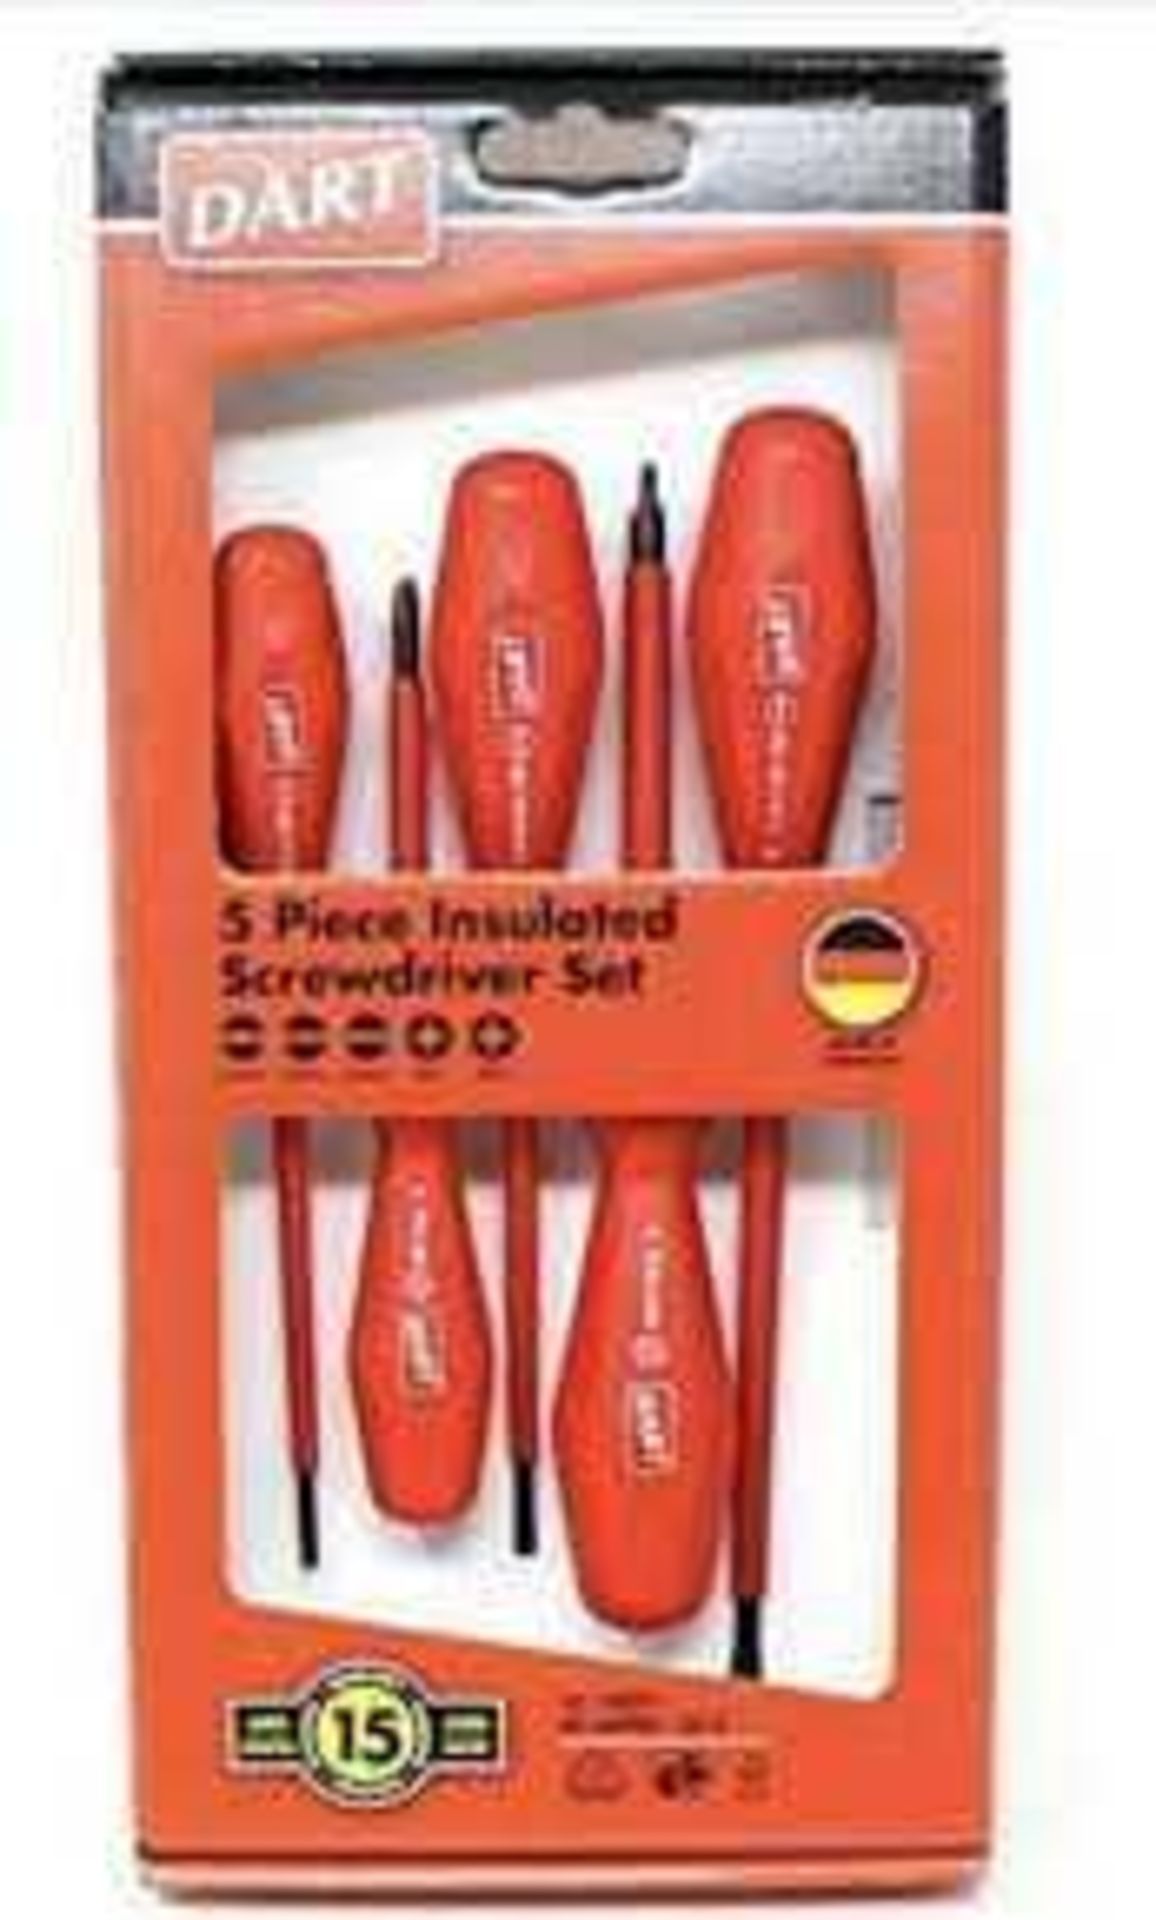 Combined RRP £160 Lot To Contain 8 Boxed Dart 5 Piece Insulated Screwdriver Set